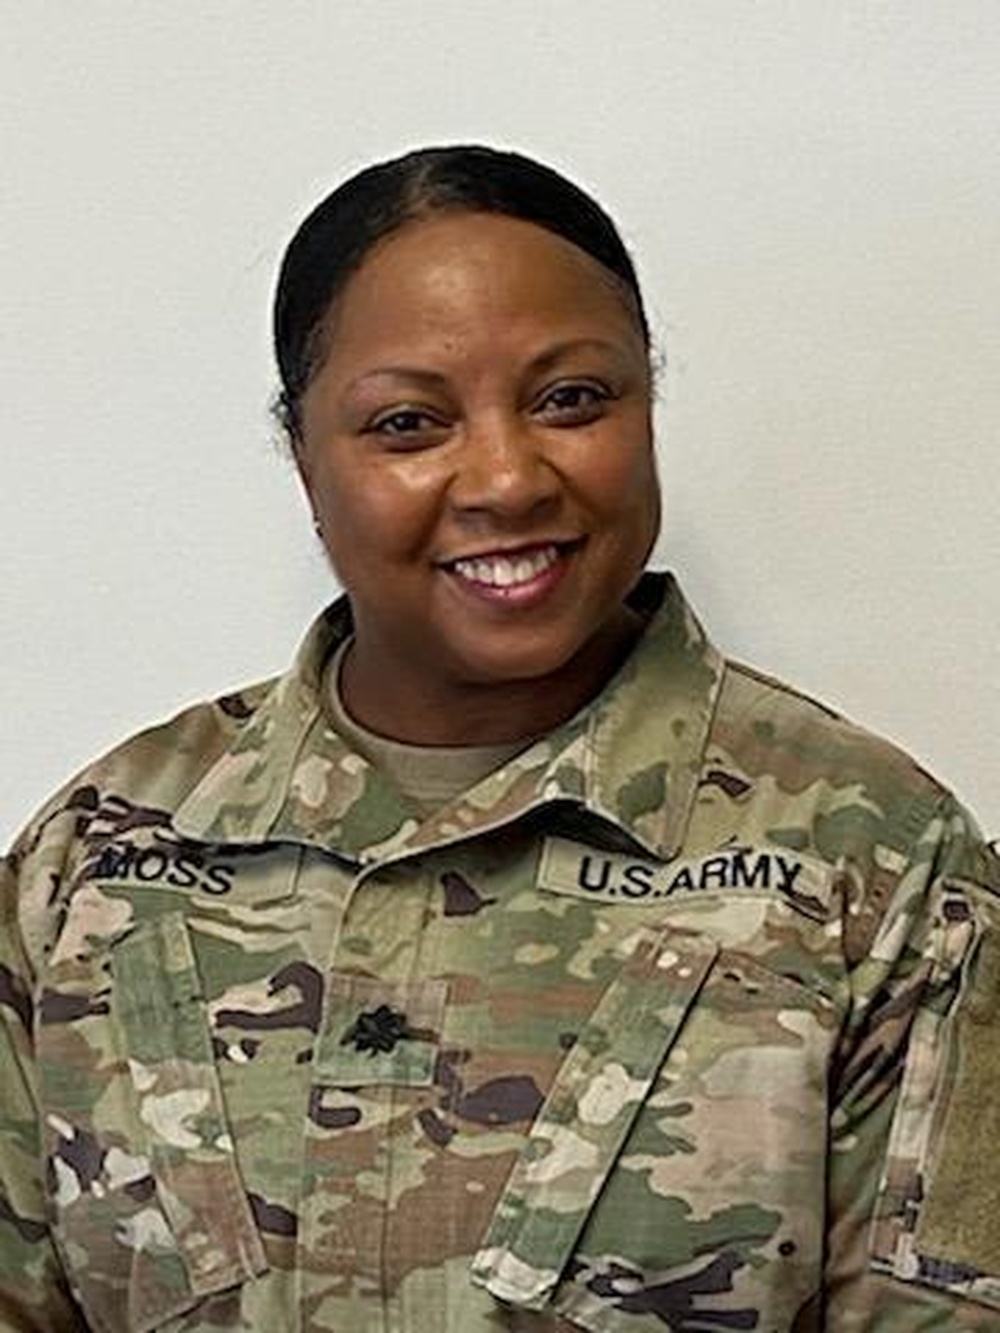 DVIDS - News - “A Soldier First” and a “Proud Black American Female”